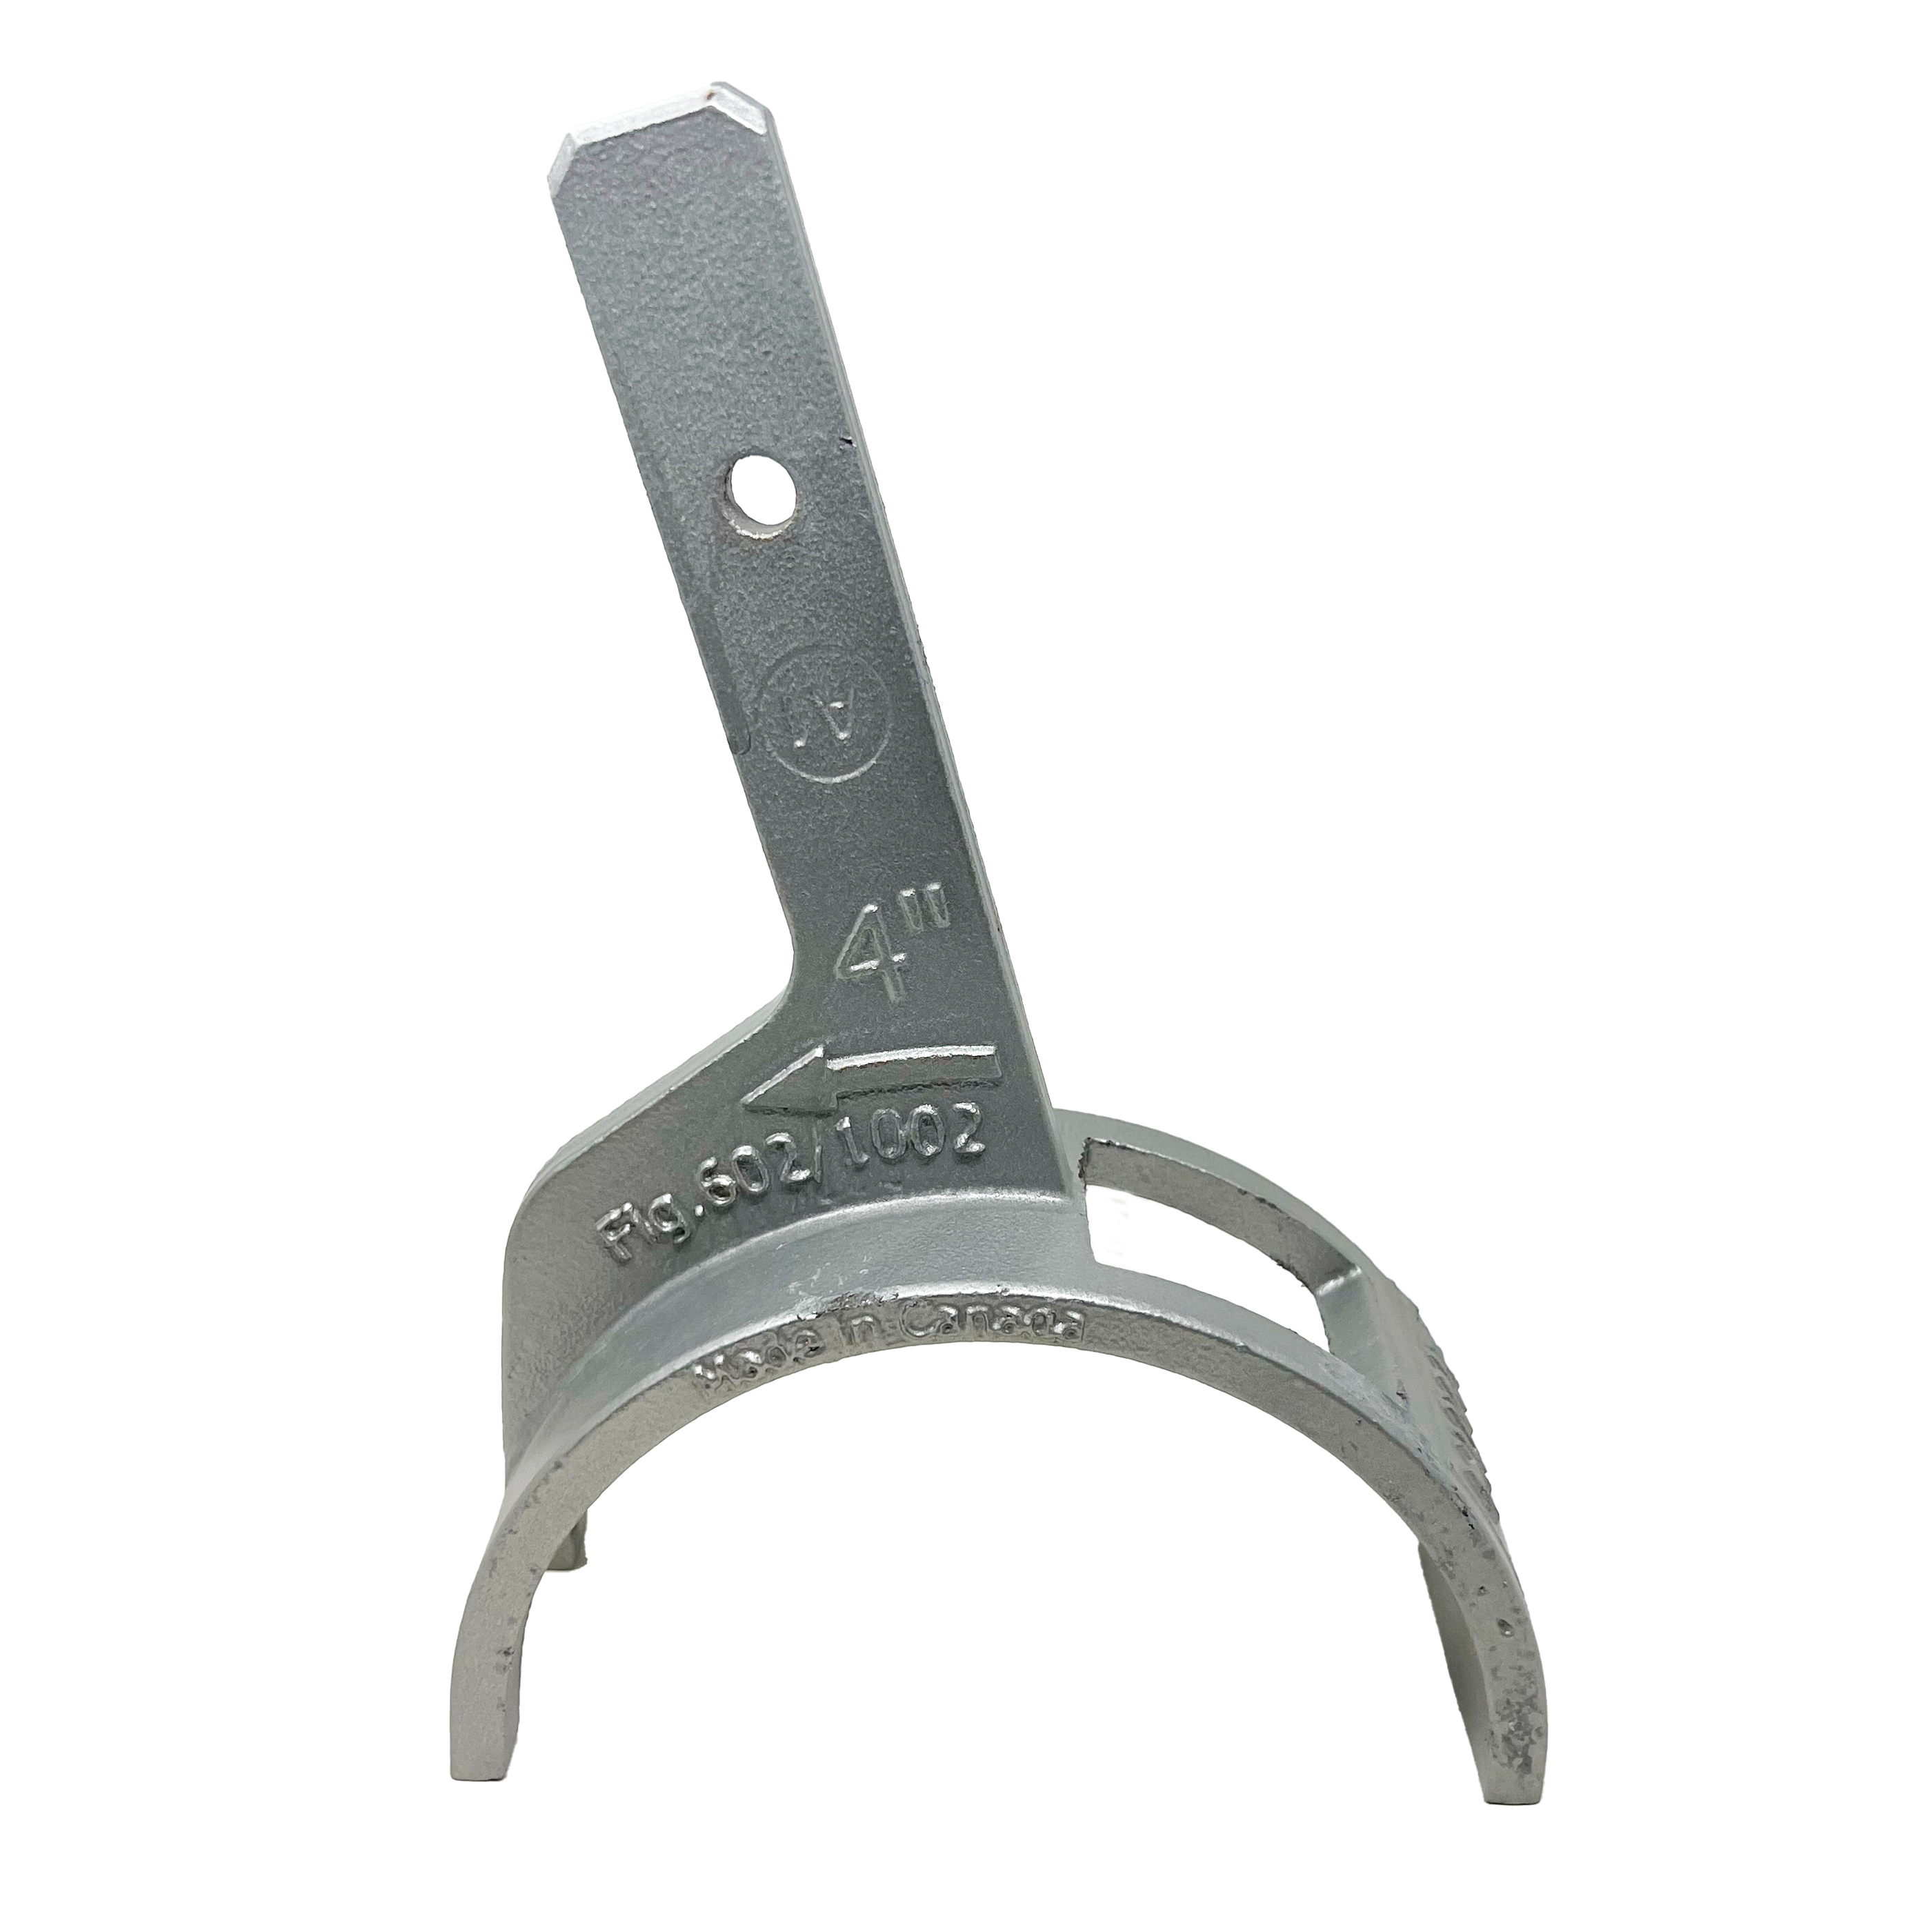 710-0025 HUWE Wrench Head, 4" for Figure 602, Figure 1002